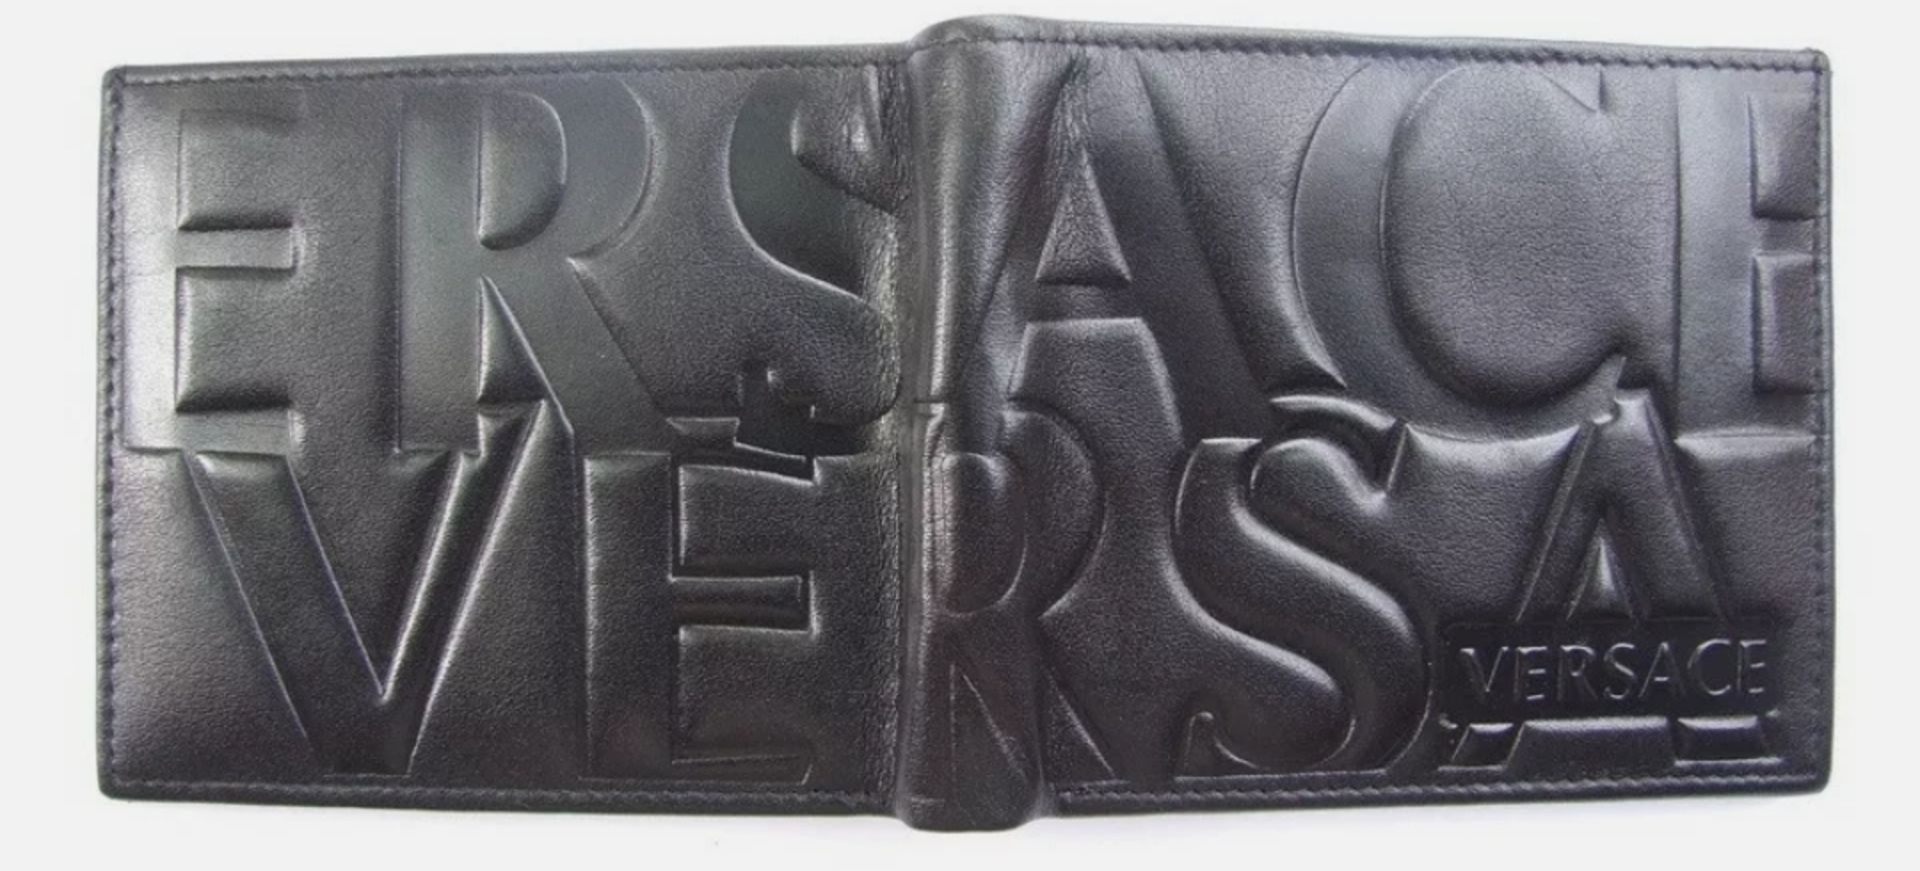 Versace Men's Leather Wallet - New With Box - Image 5 of 7